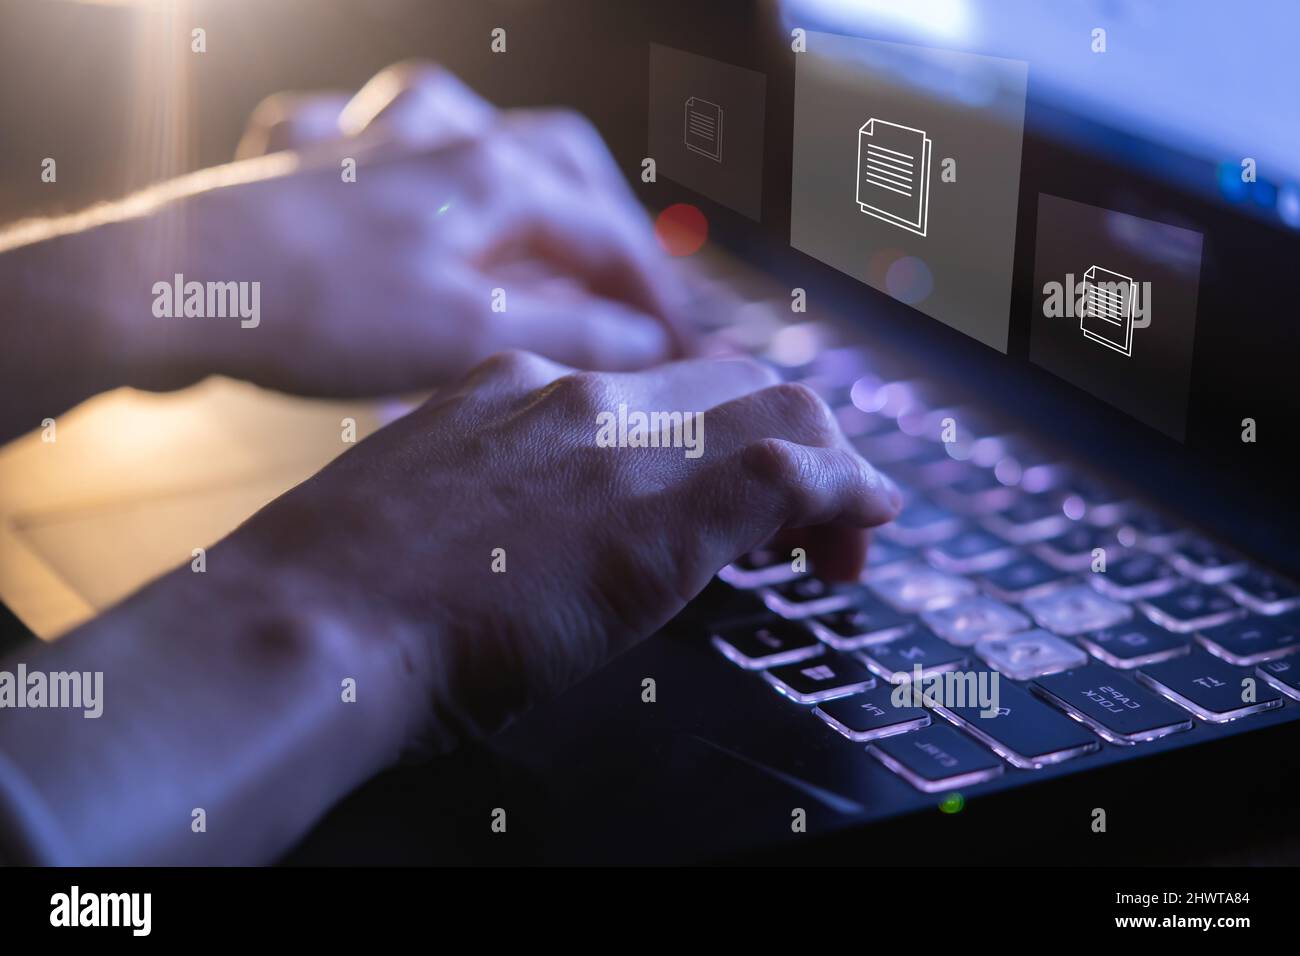 Person works with documents, data files on a laptop. Stock Photo